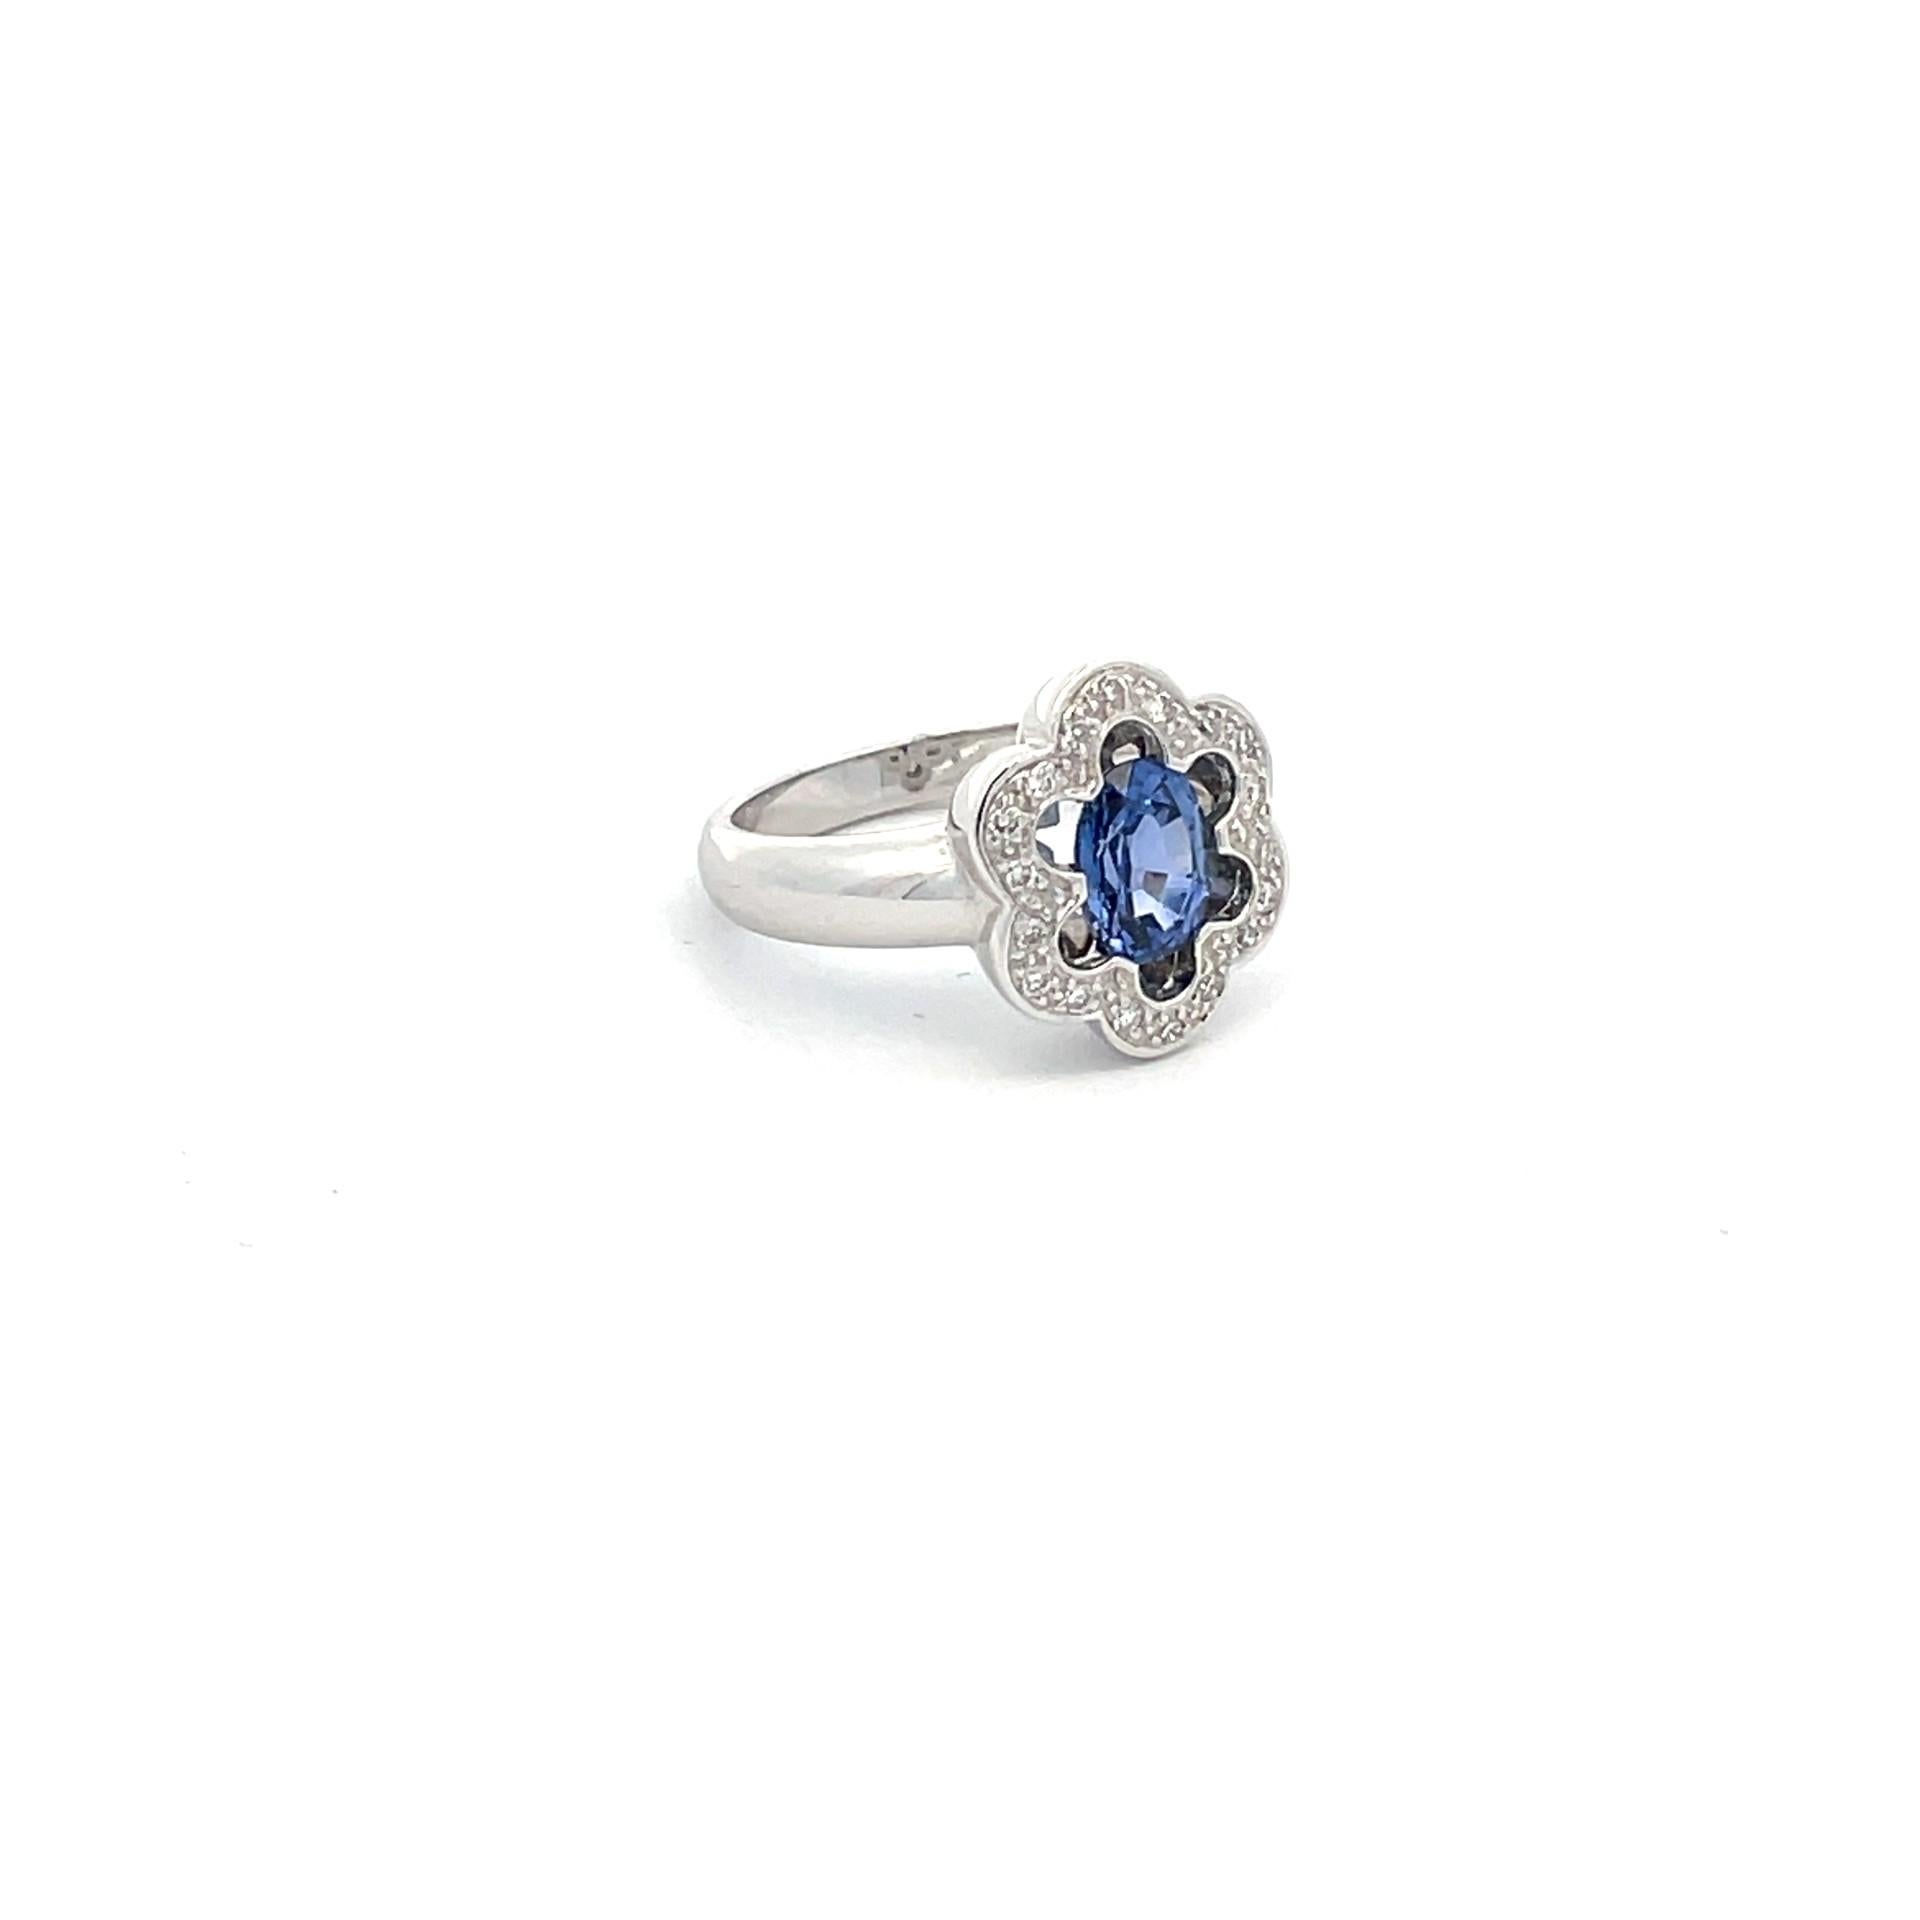 Blooming with sophistication this solitaire flower ring with natural blue sapphire center, natural white diamonds scalloped halo in 18kt white gold.

1 natural blue sapphire 1.53ct total weight

12 brilliant cut natural diamonds 0.84ct total